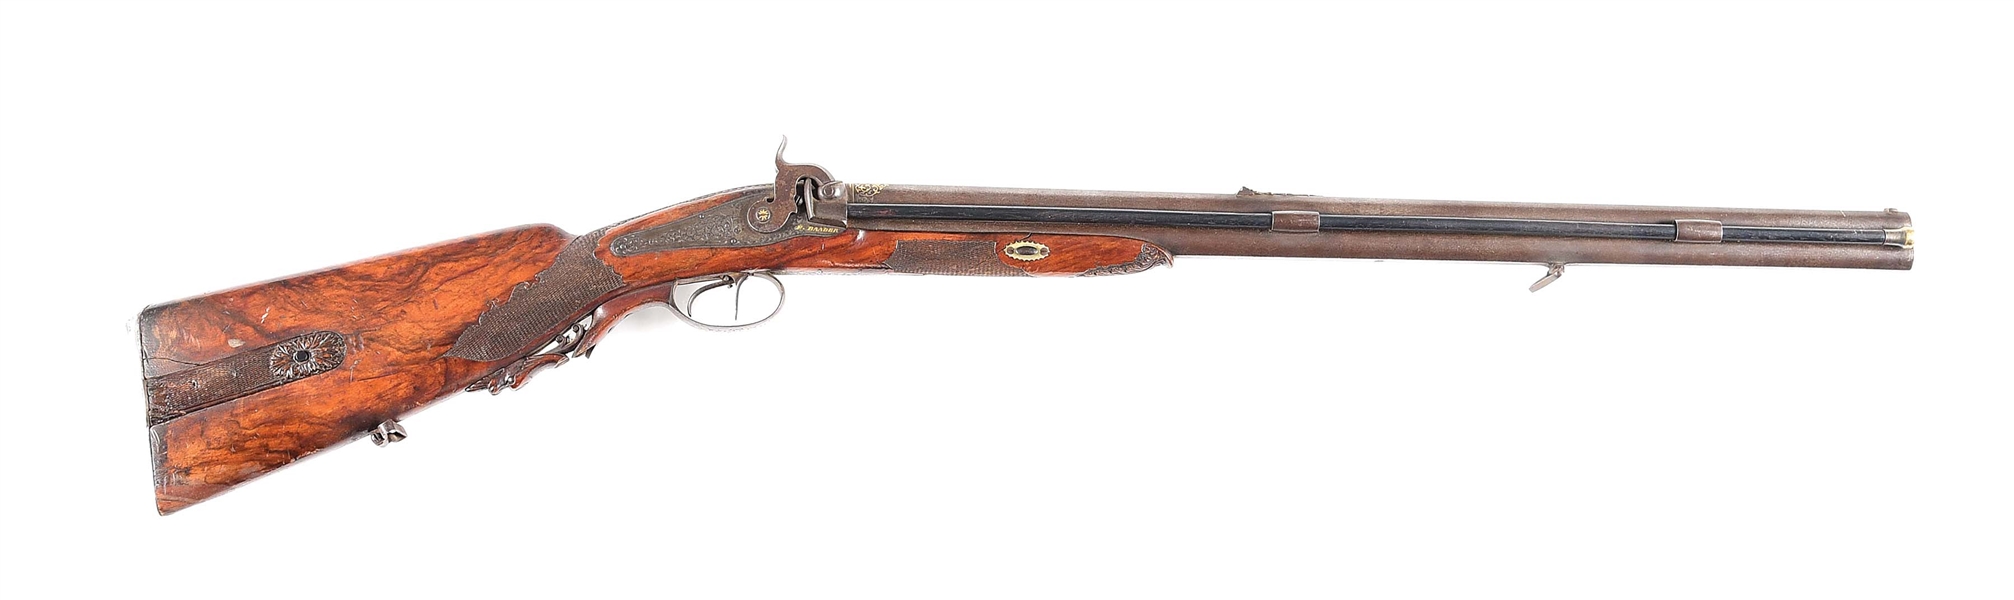 (A) AN ATTRACTIVE CARVED AND ENGRAVED PERCUSSION COMBINATION RIFLE BY FRANZ BAADER, FORMERLY OF THE BAVARIAN ROYAL GUN ROOM.